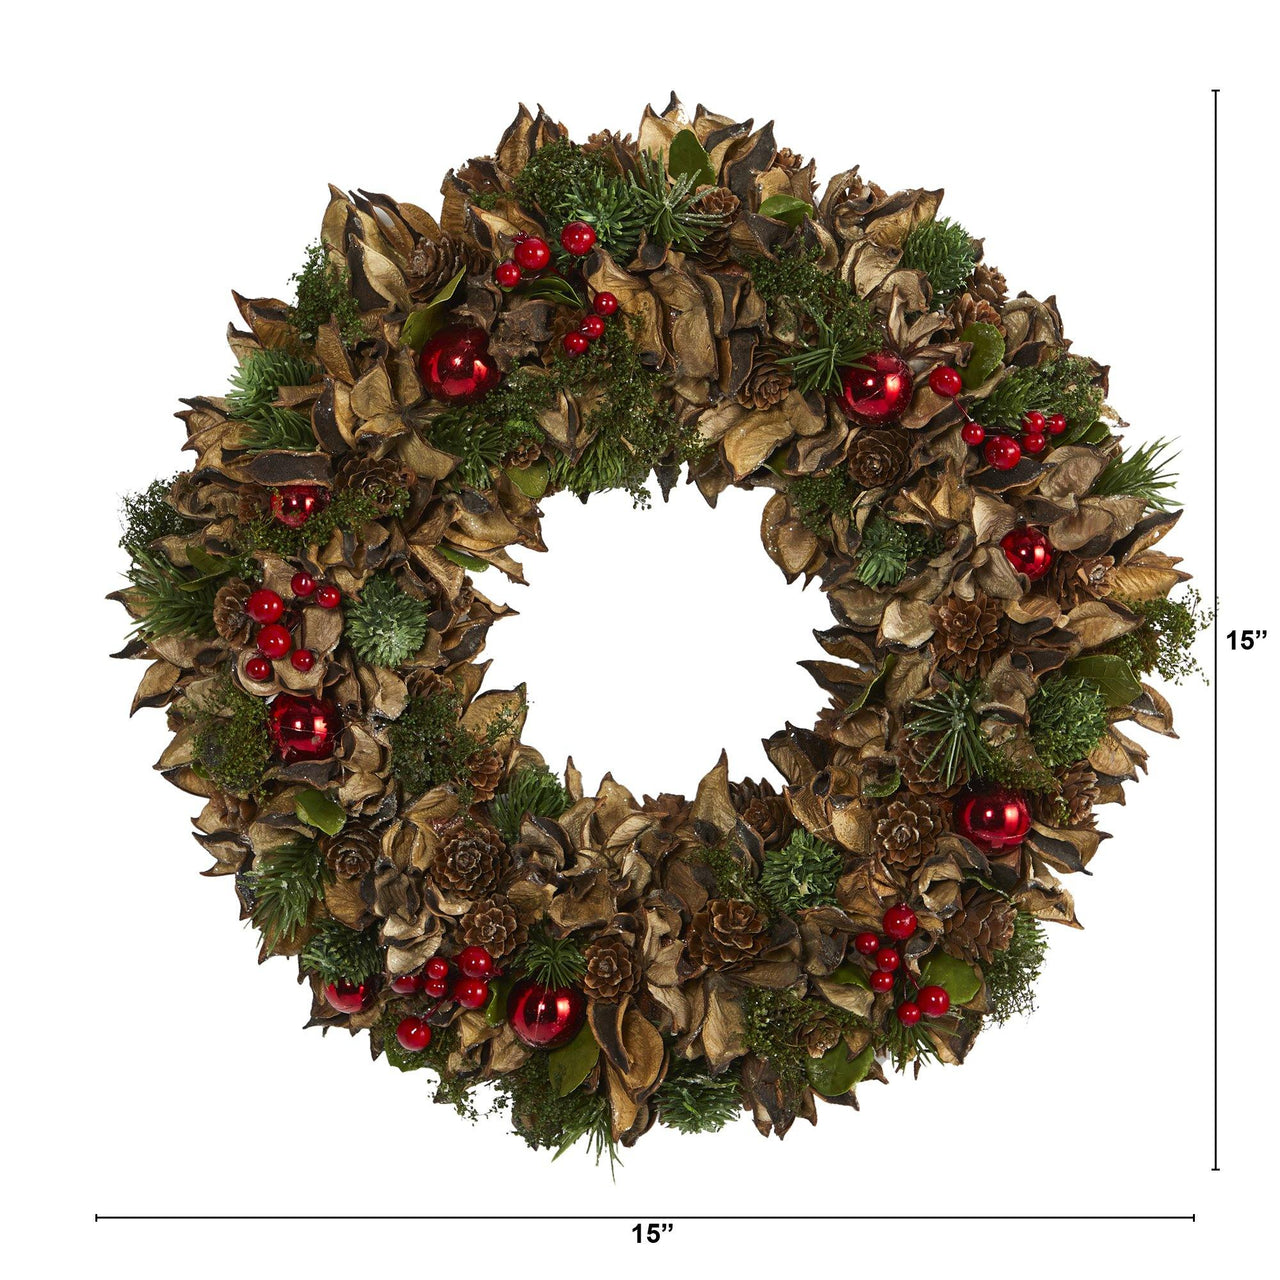 15” Holiday Artificial Wreath with Pine Cones and Ornaments - The Fox Decor